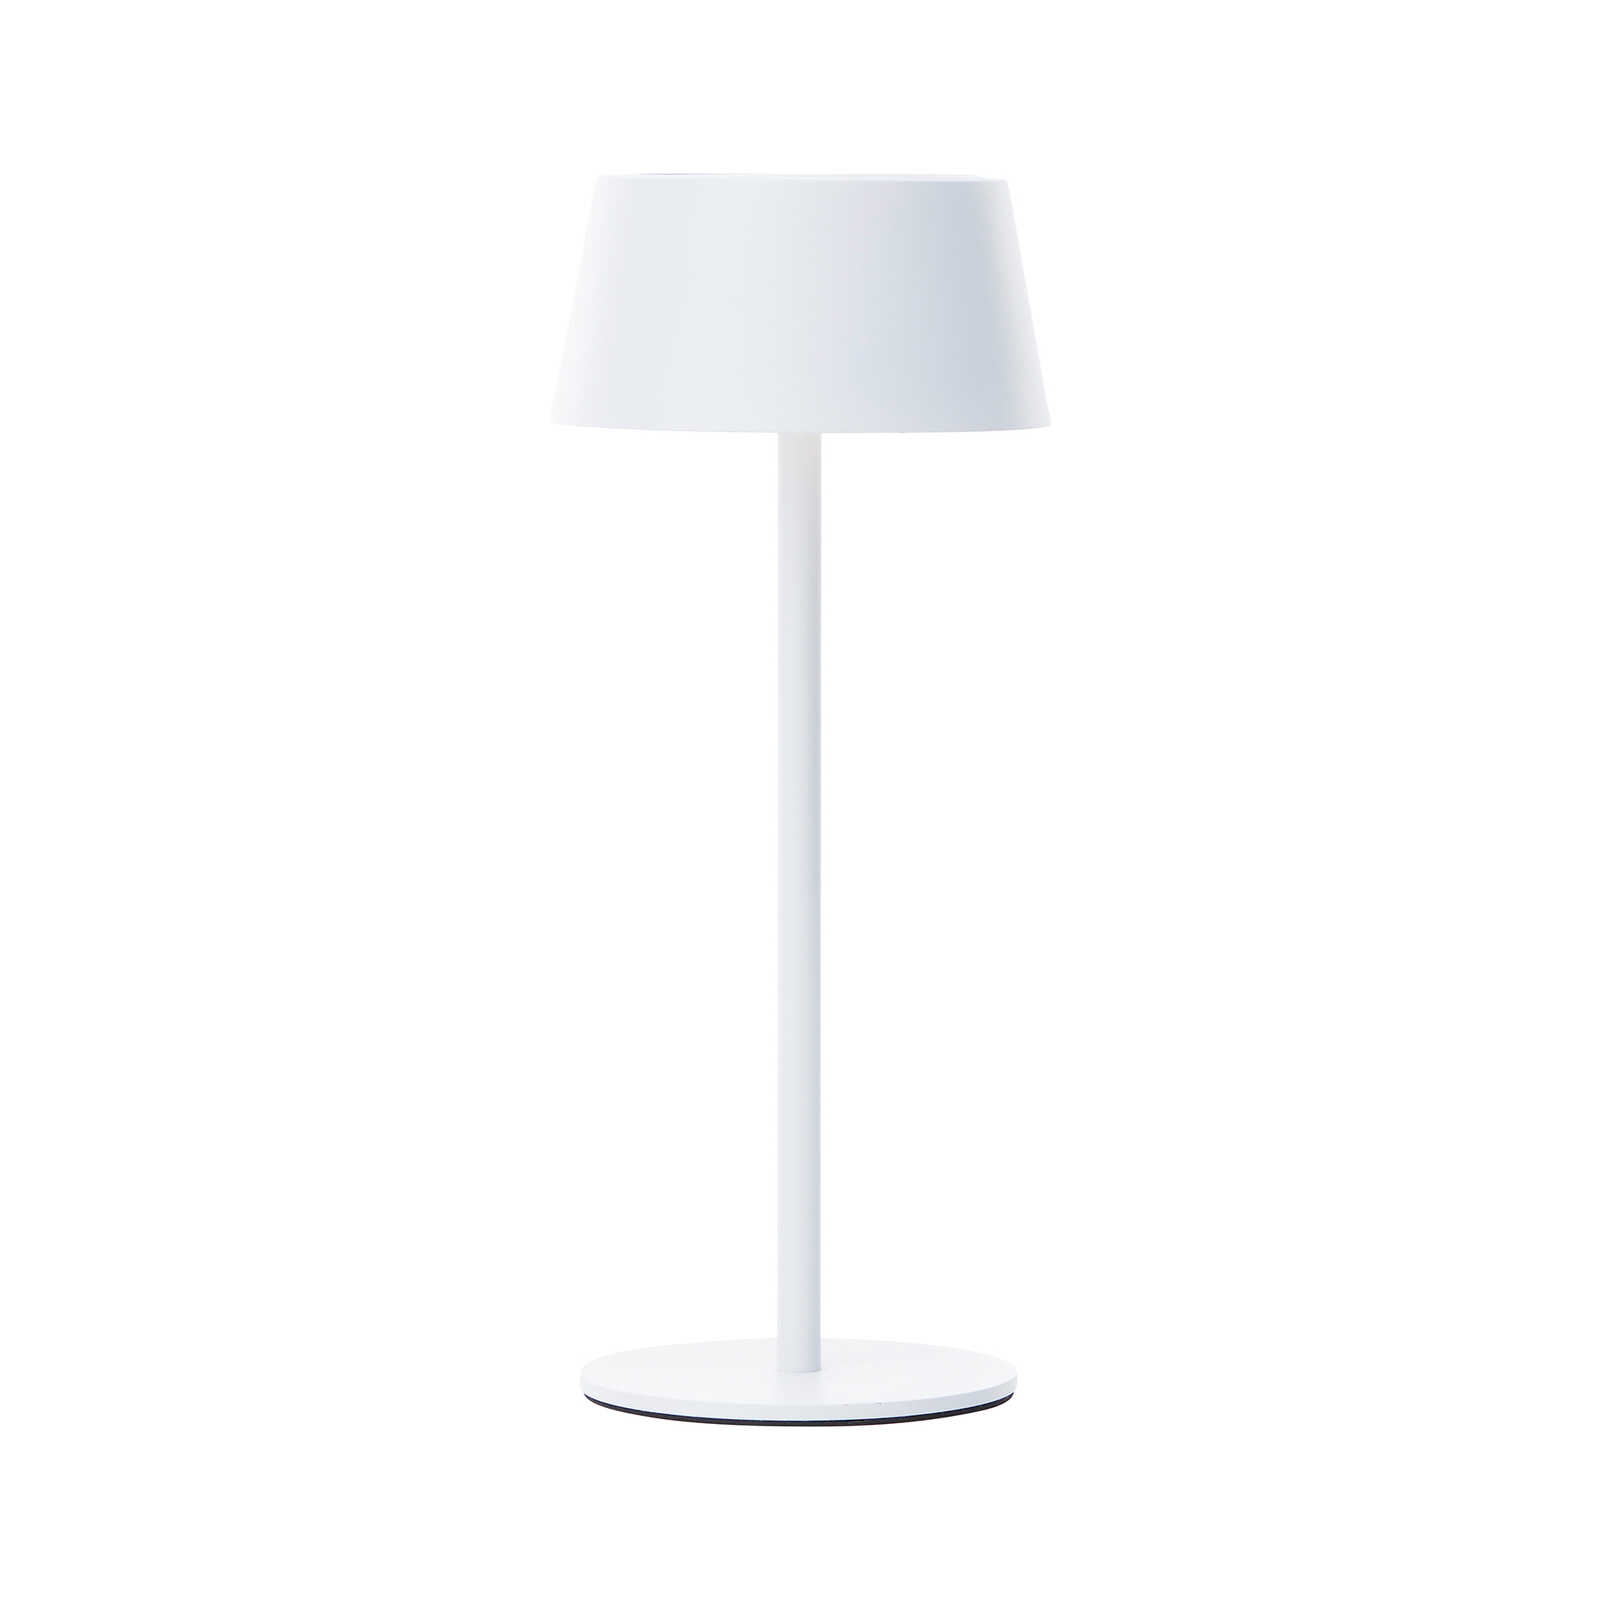 Metal table lamp - Outy 1 - White
